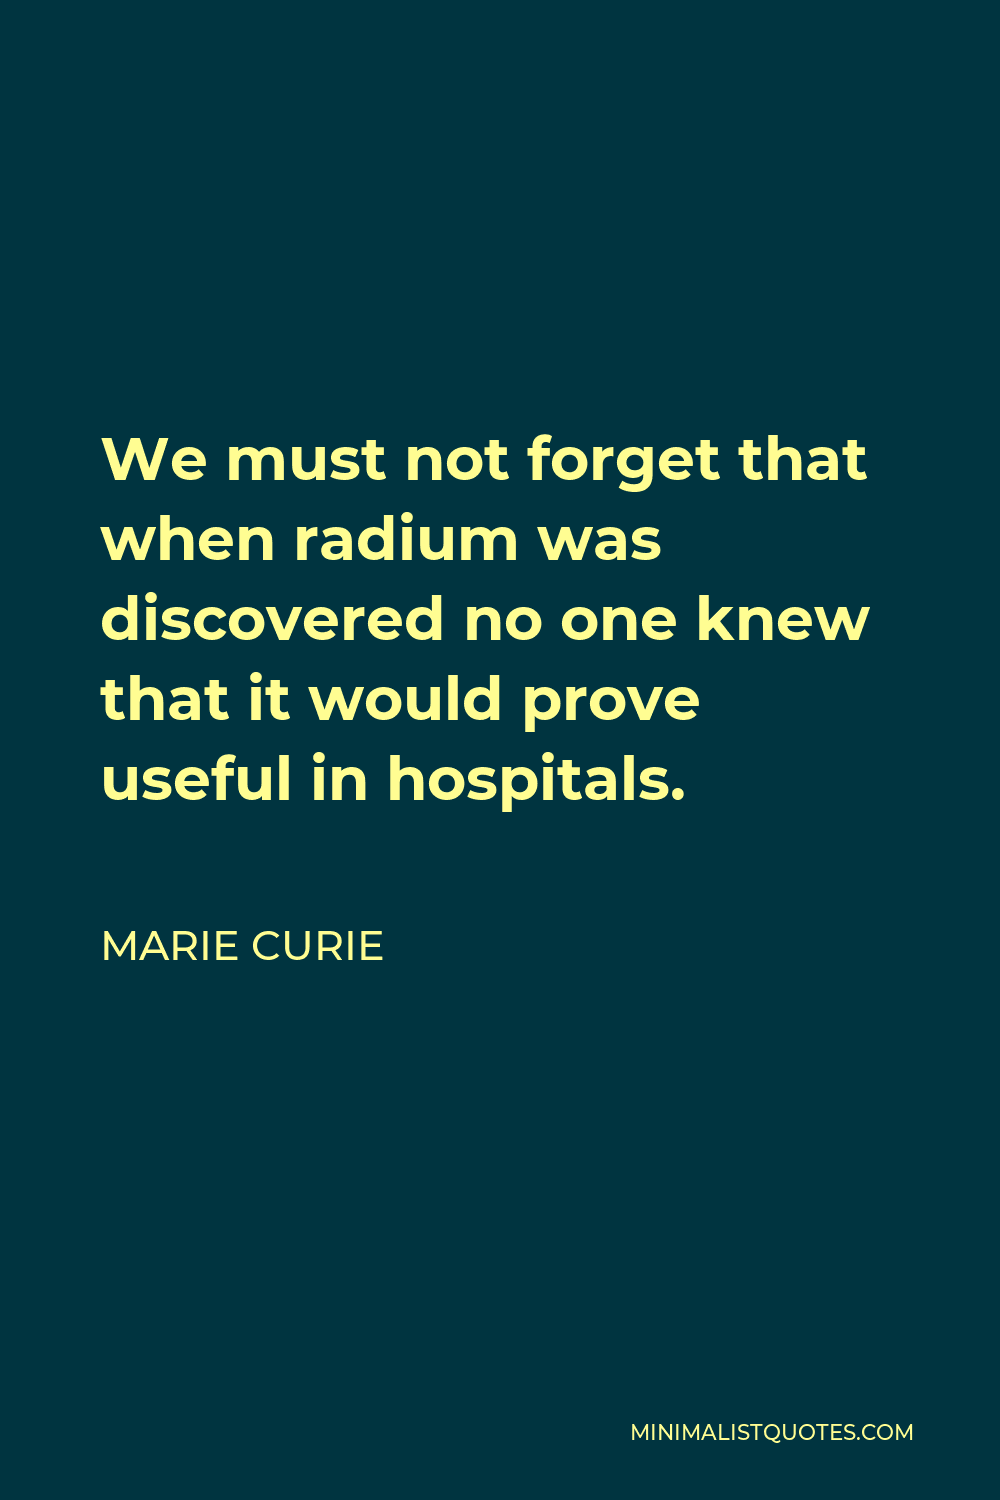 Marie Curie Quote - We must not forget that when radium was discovered no one knew that it would prove useful in hospitals.